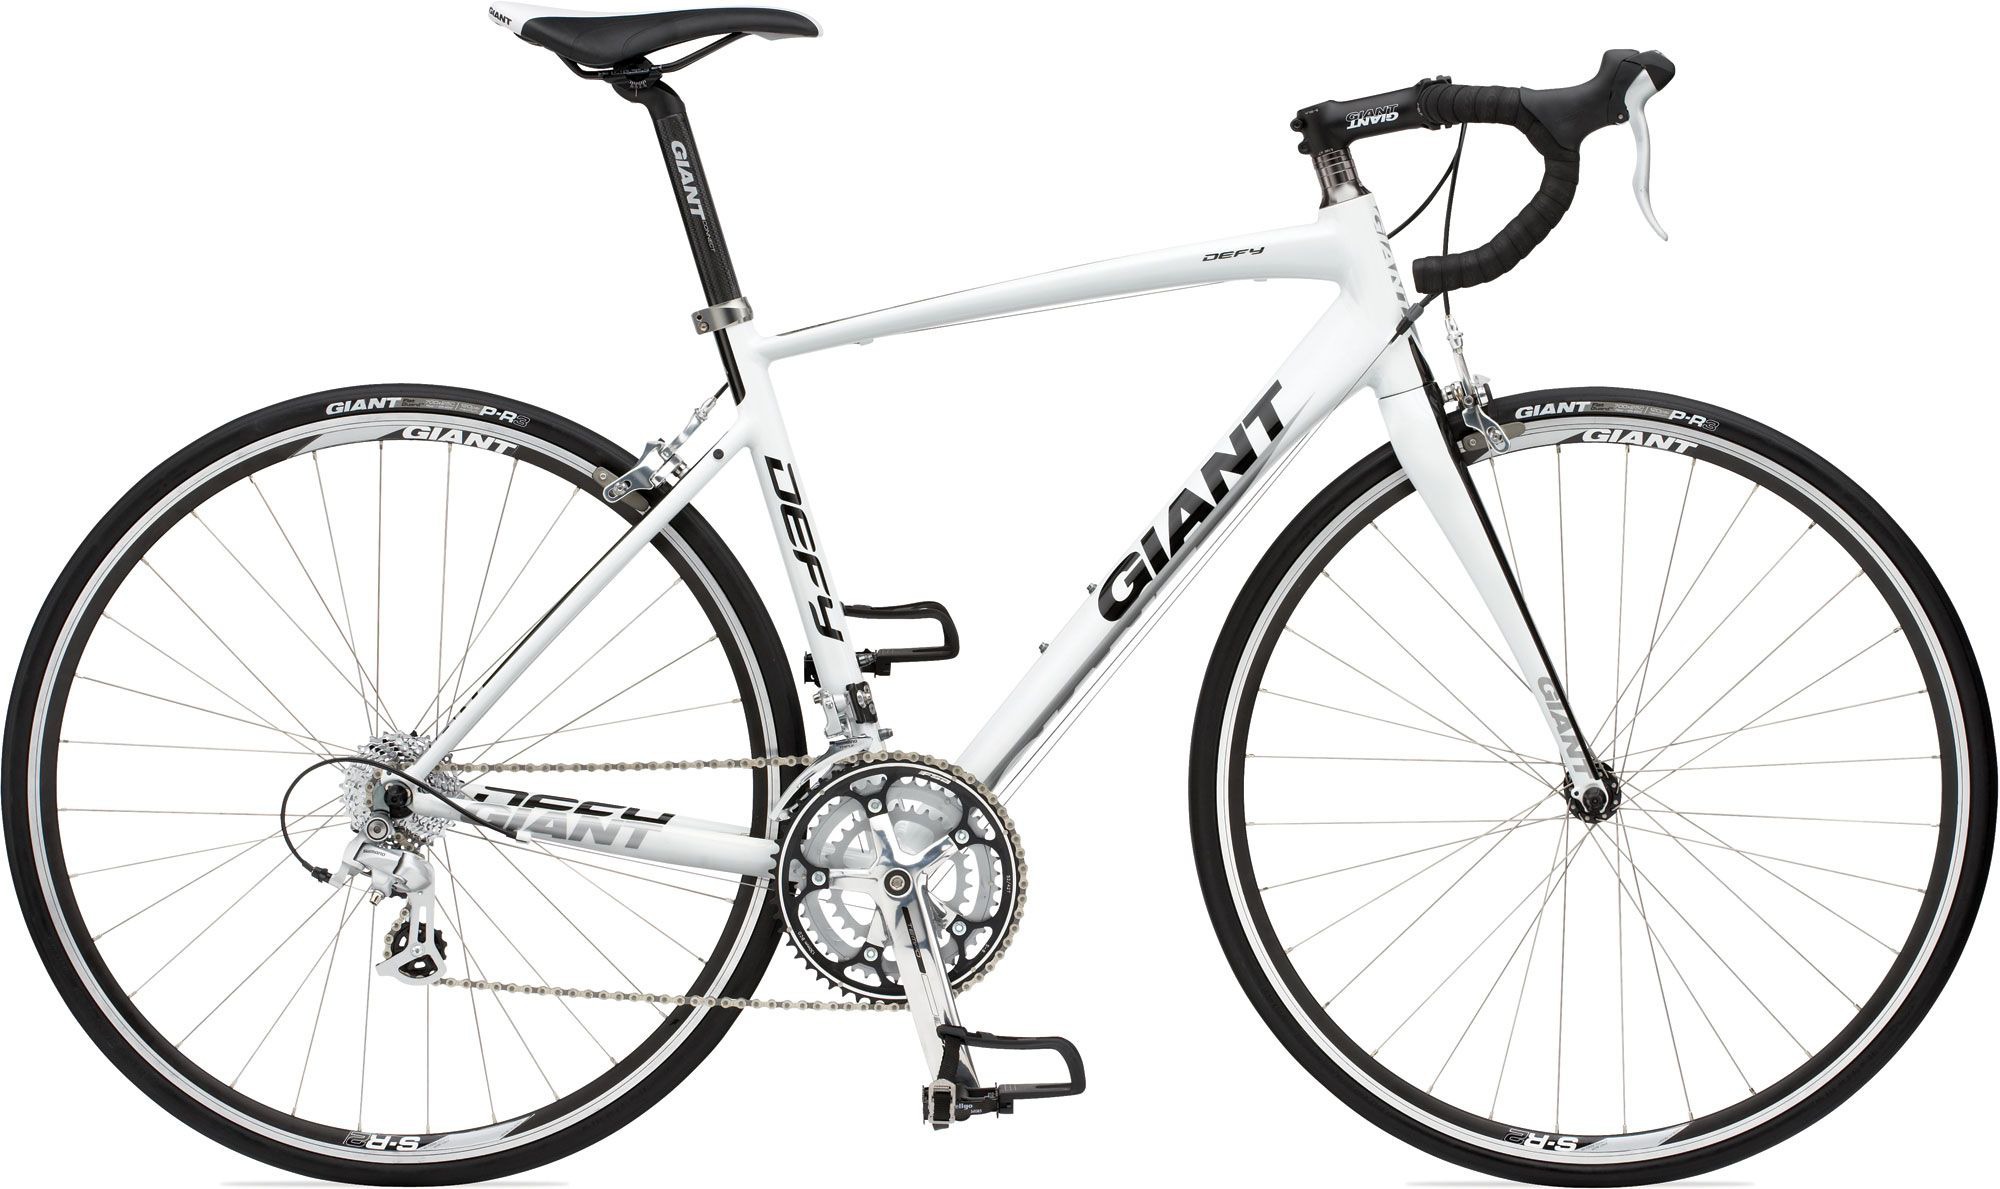 11 Giant Defy 3 Bicycle Details Bicyclebluebook Com